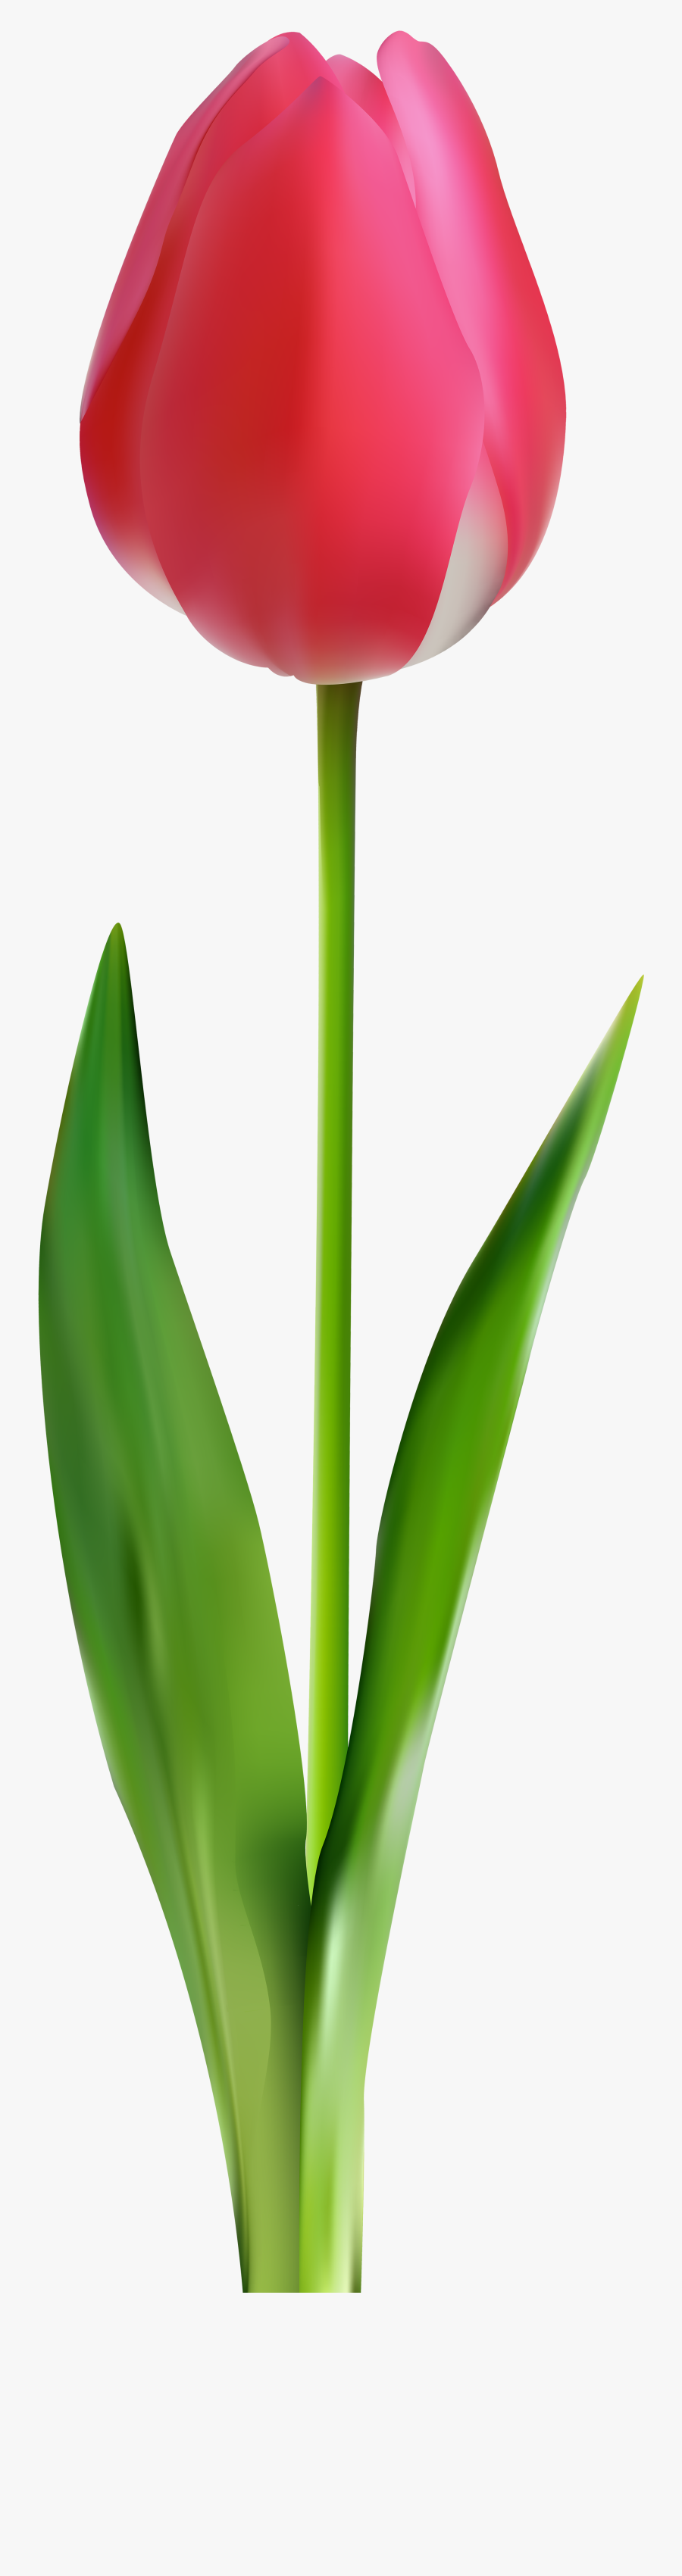 Tulip Black And White Clipart - Agave, Transparent Clipart